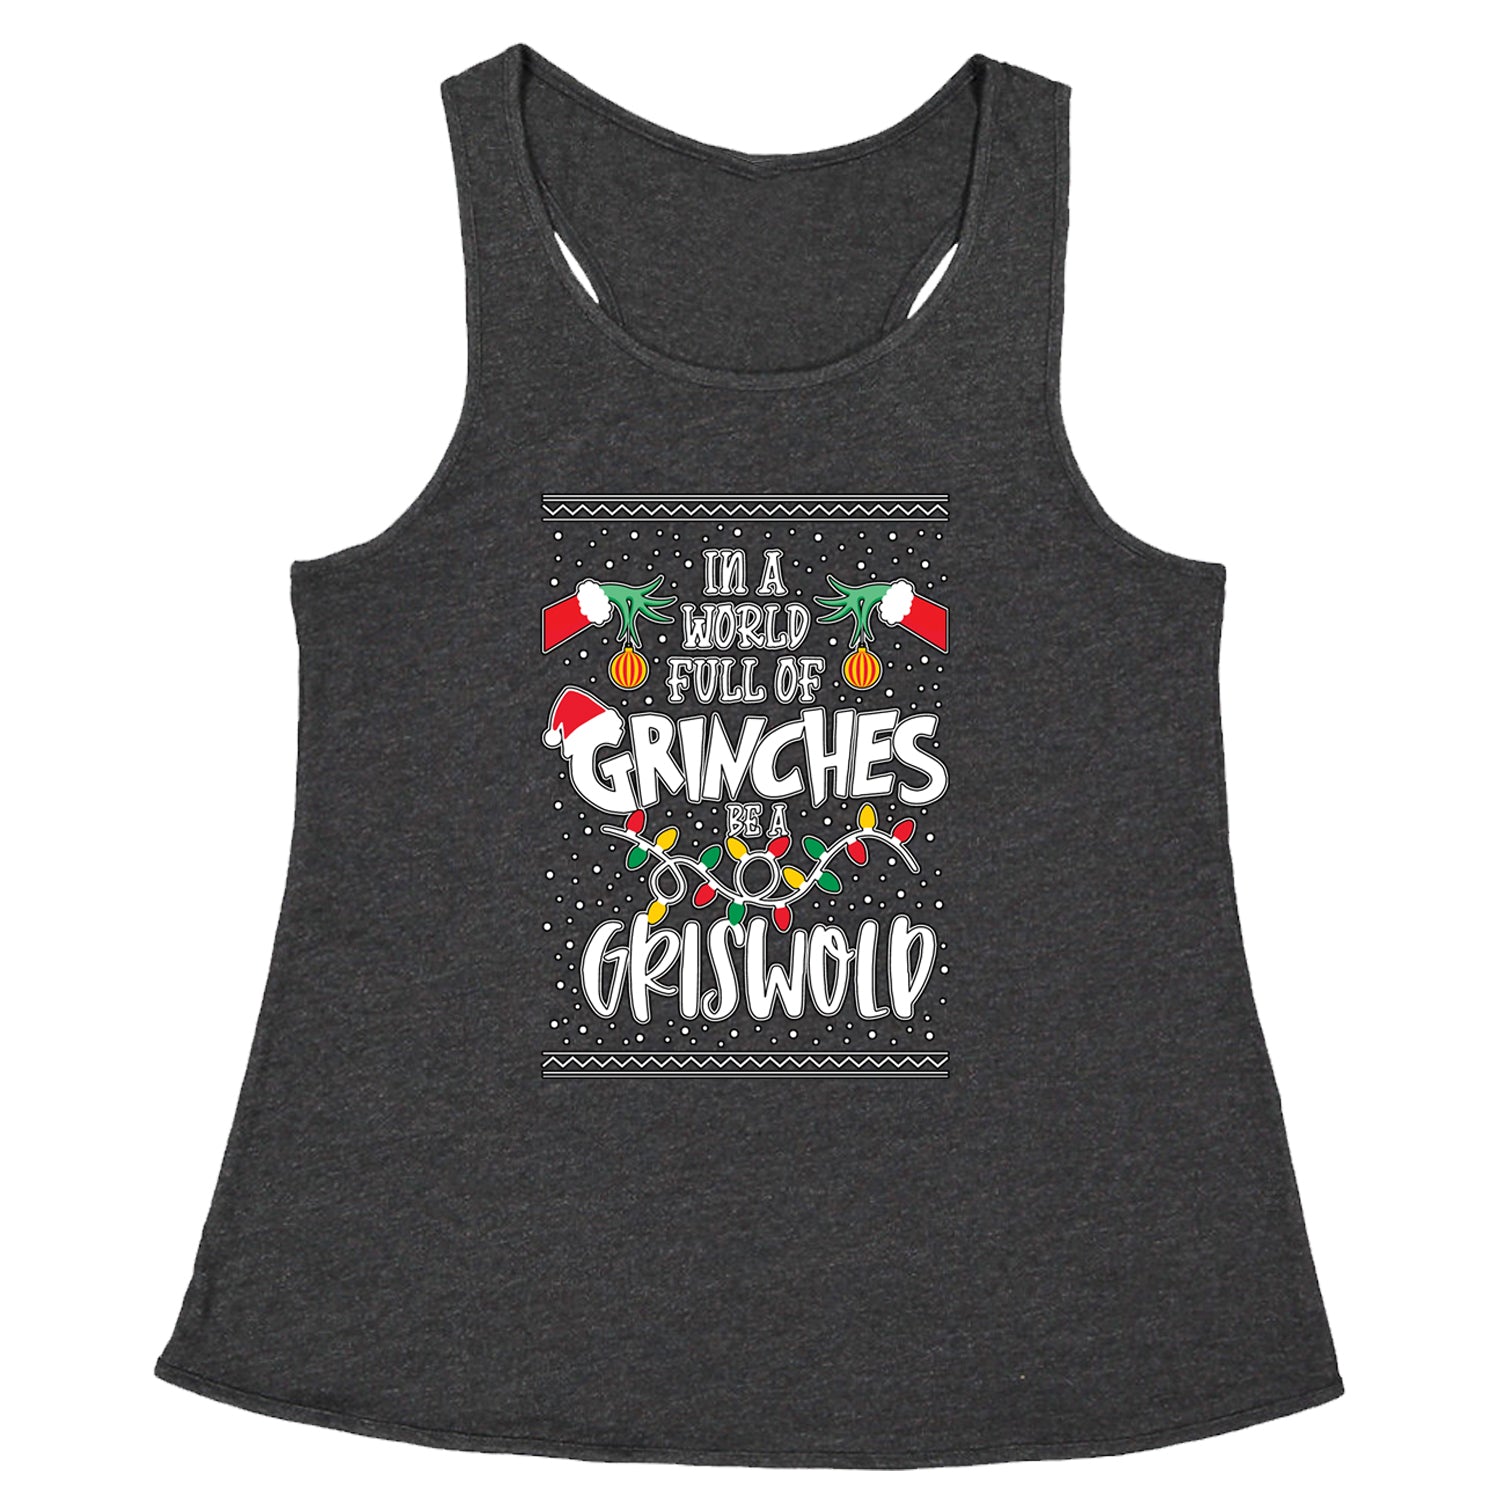 In A World Full Of Grinches, Be A Griswold Racerback Tank Top for Women clark, griswold, lampoon, margot by Expression Tees